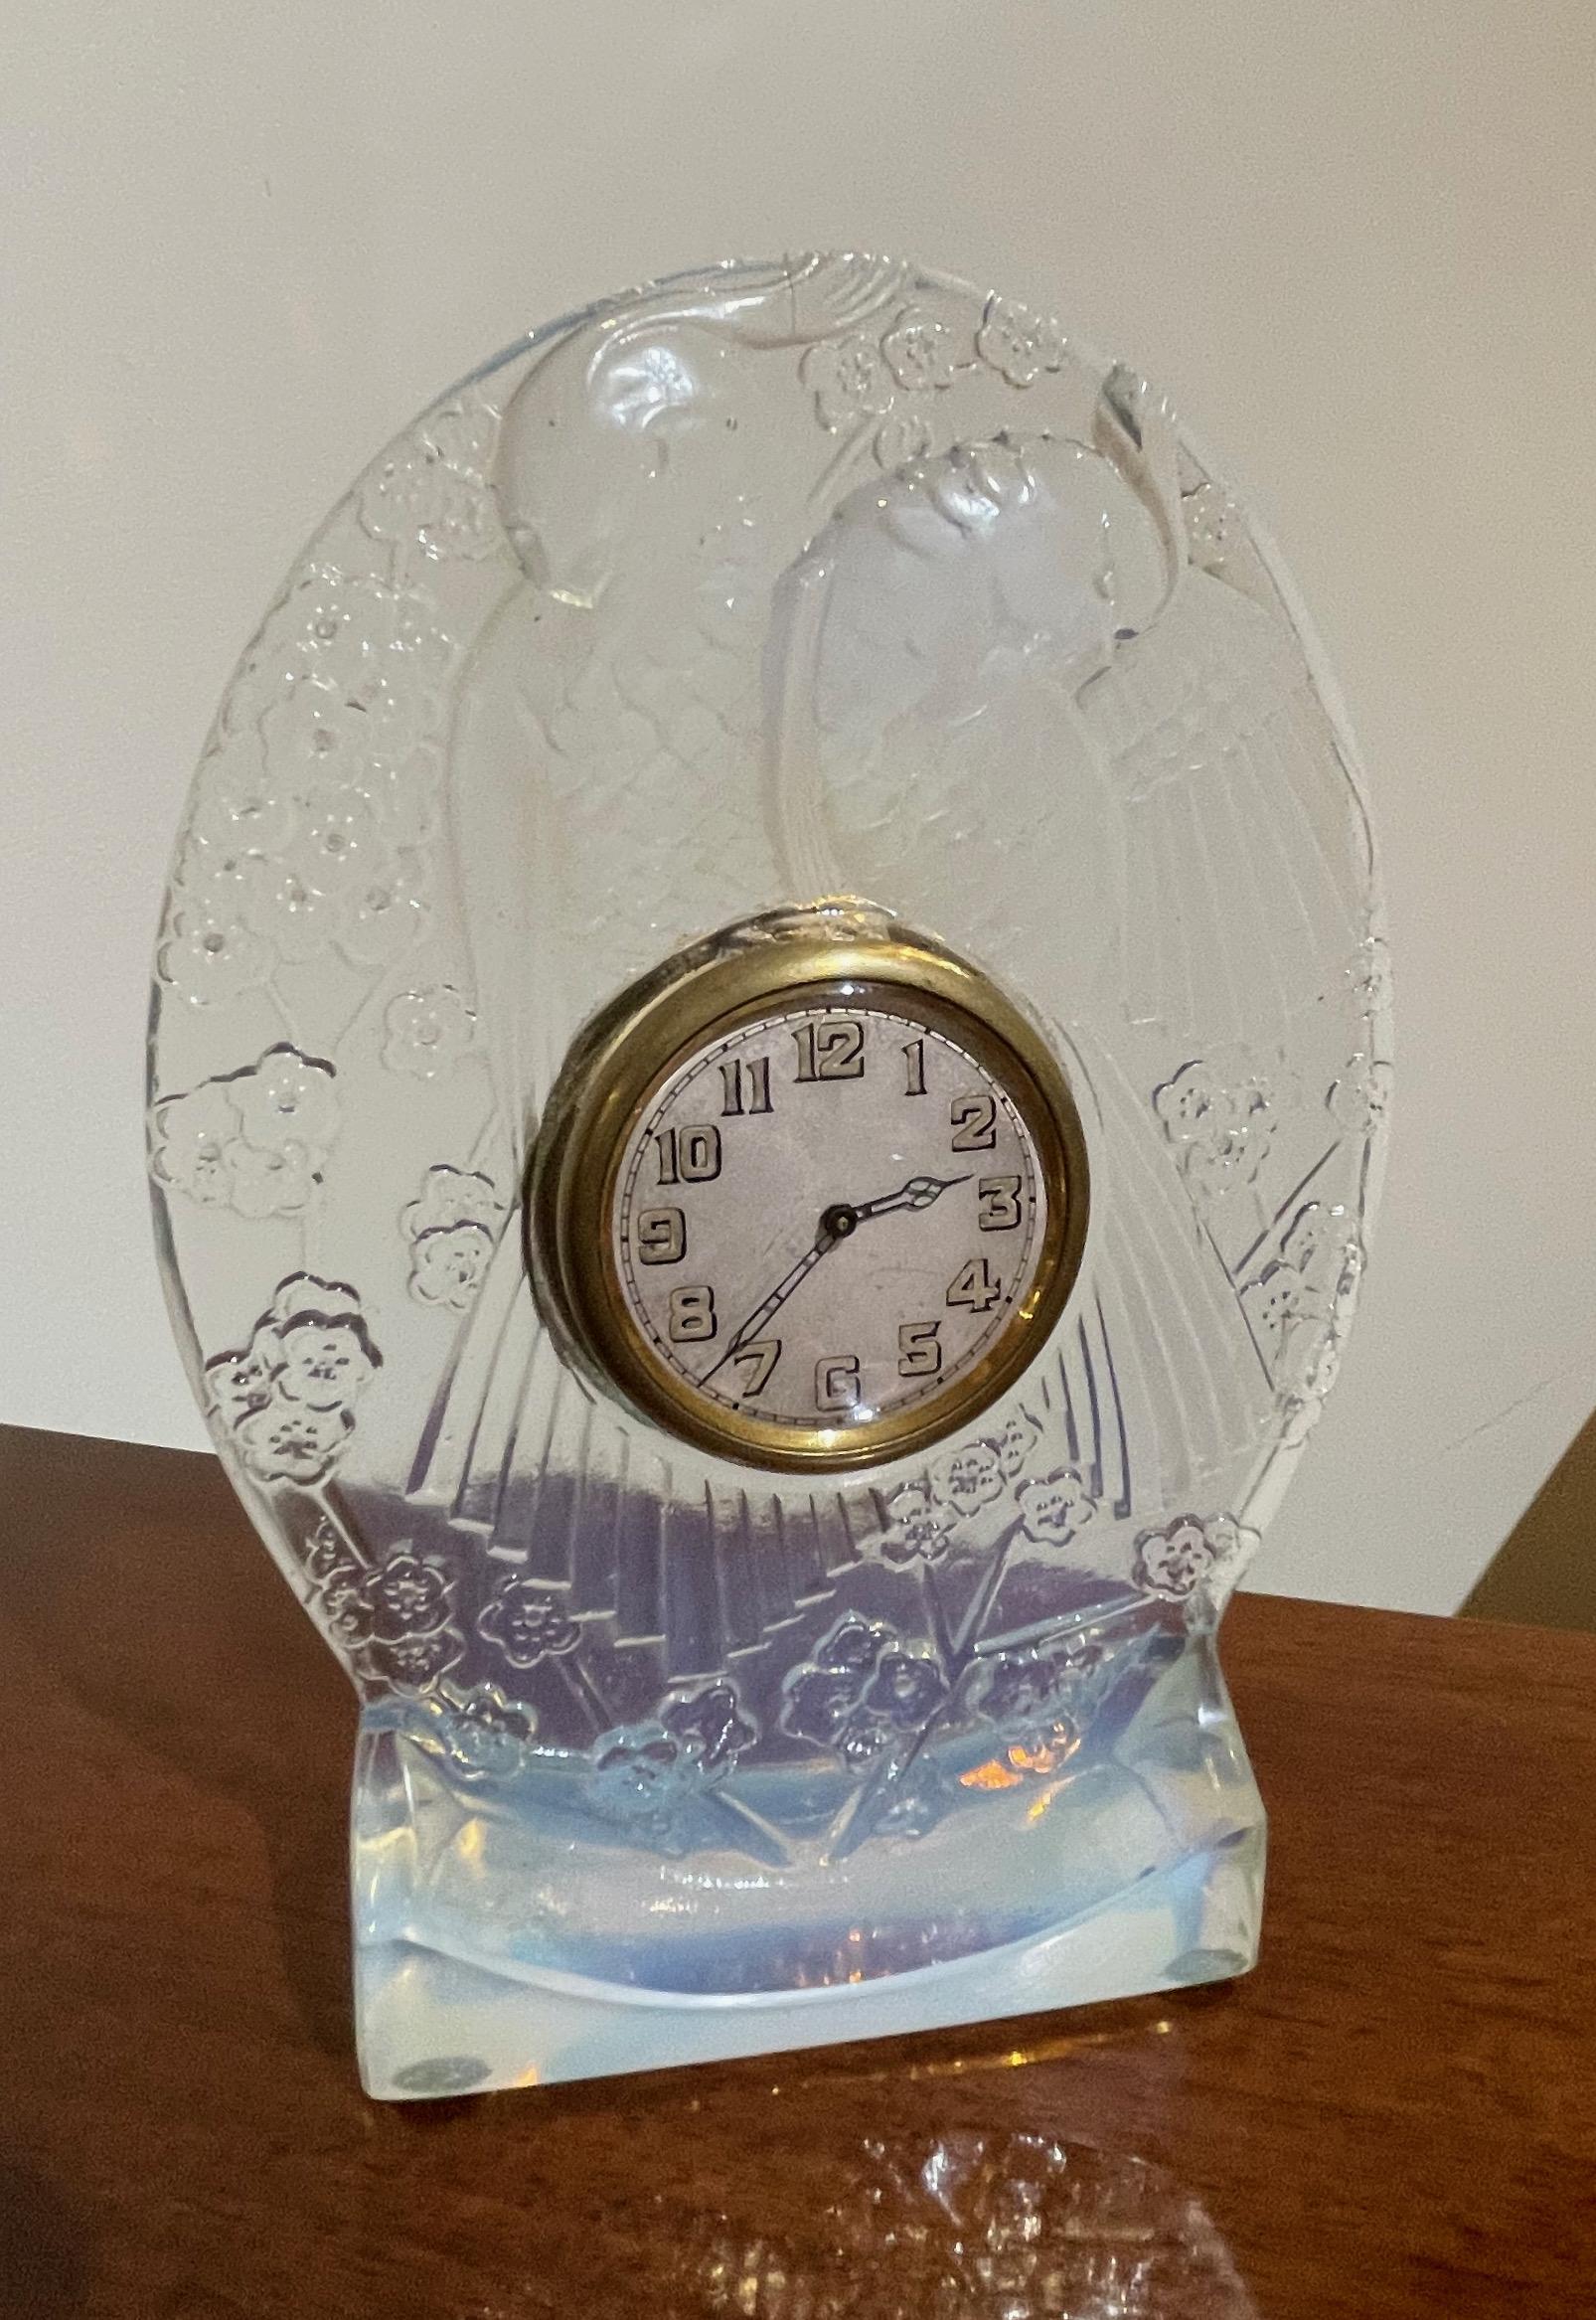 René Lalique Art Deco opalescent glass clock with love birds or cockatoo. Lalique design, signed in script on the bottom, Lalique, france. Excellent condition with a very nice original swiss watch/clock movement didisheim-goldschmidt. Fine details,